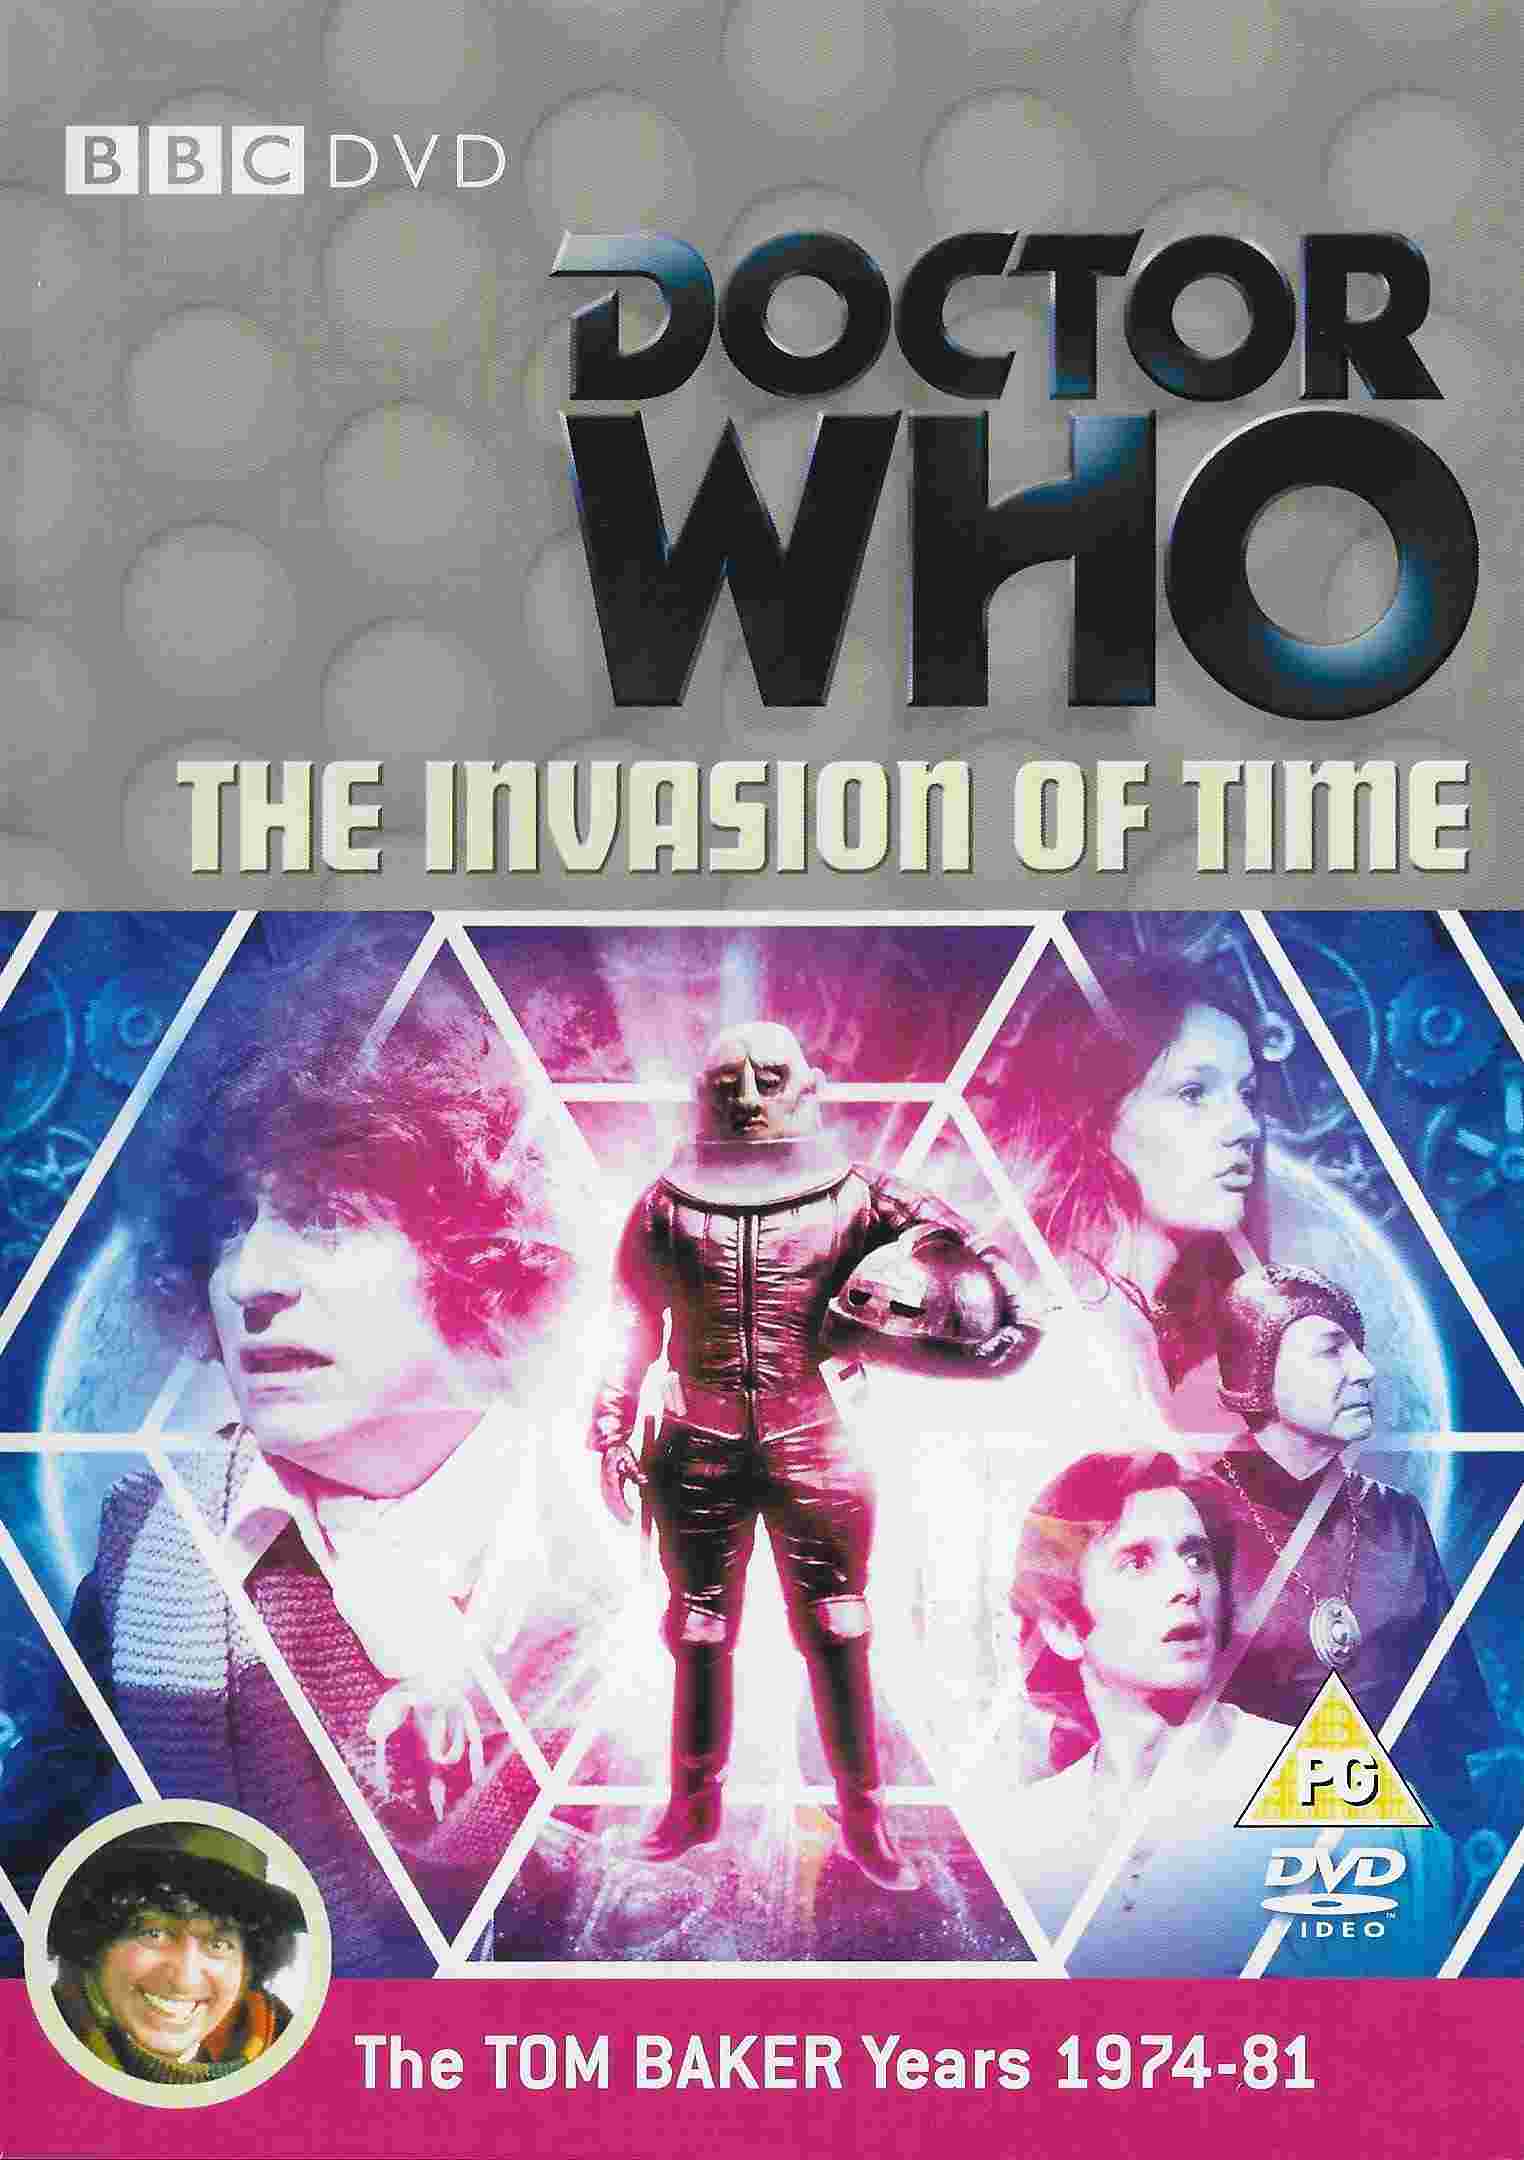 Picture of BBCDVD 2586 Doctor Who - The invasion of time by artist David Agnew from the BBC dvds - Records and Tapes library